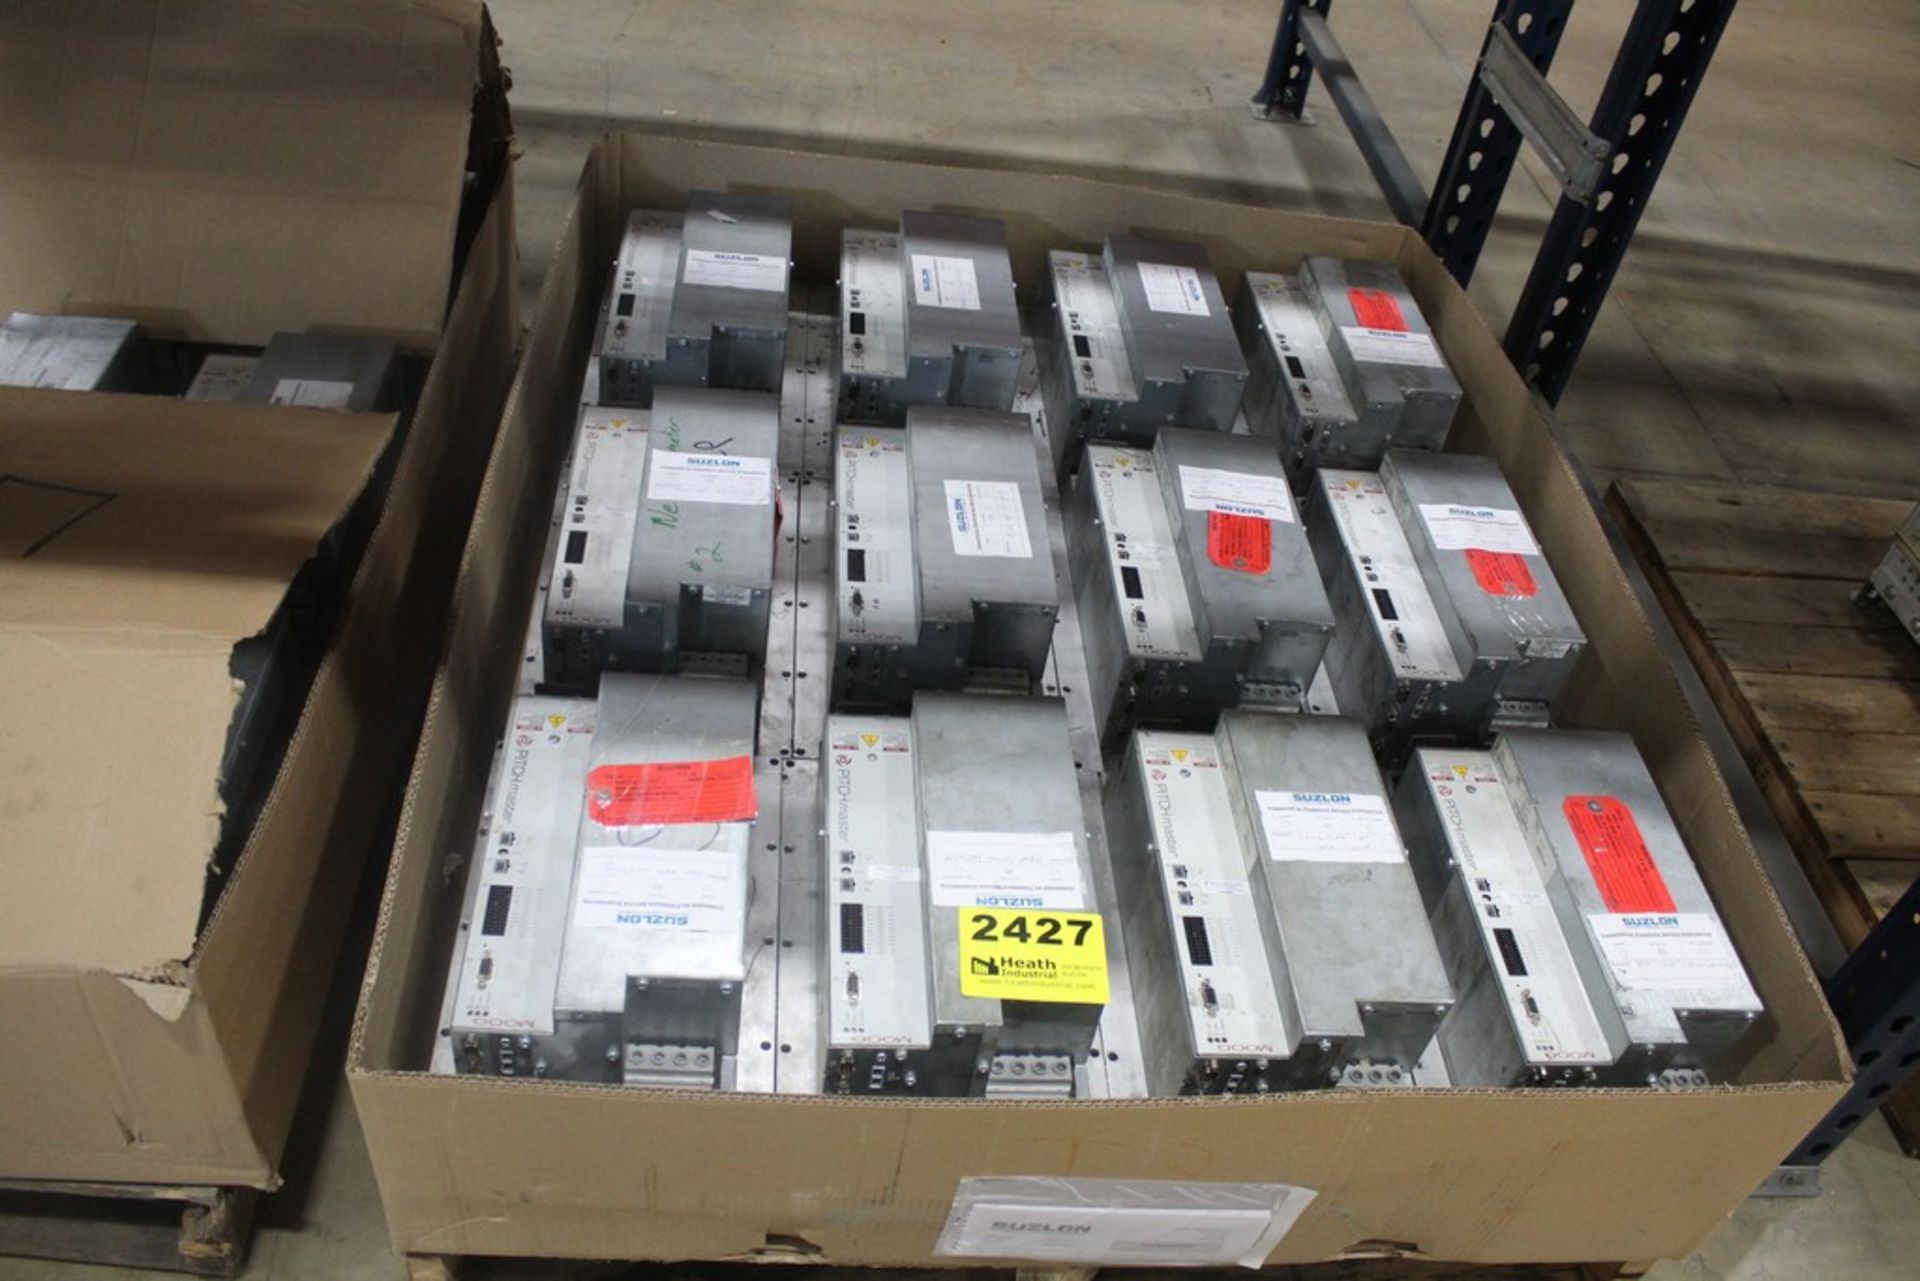 LARGE QUANTITY OF PITCHMASTER CONTROL BOXES ON PALLET